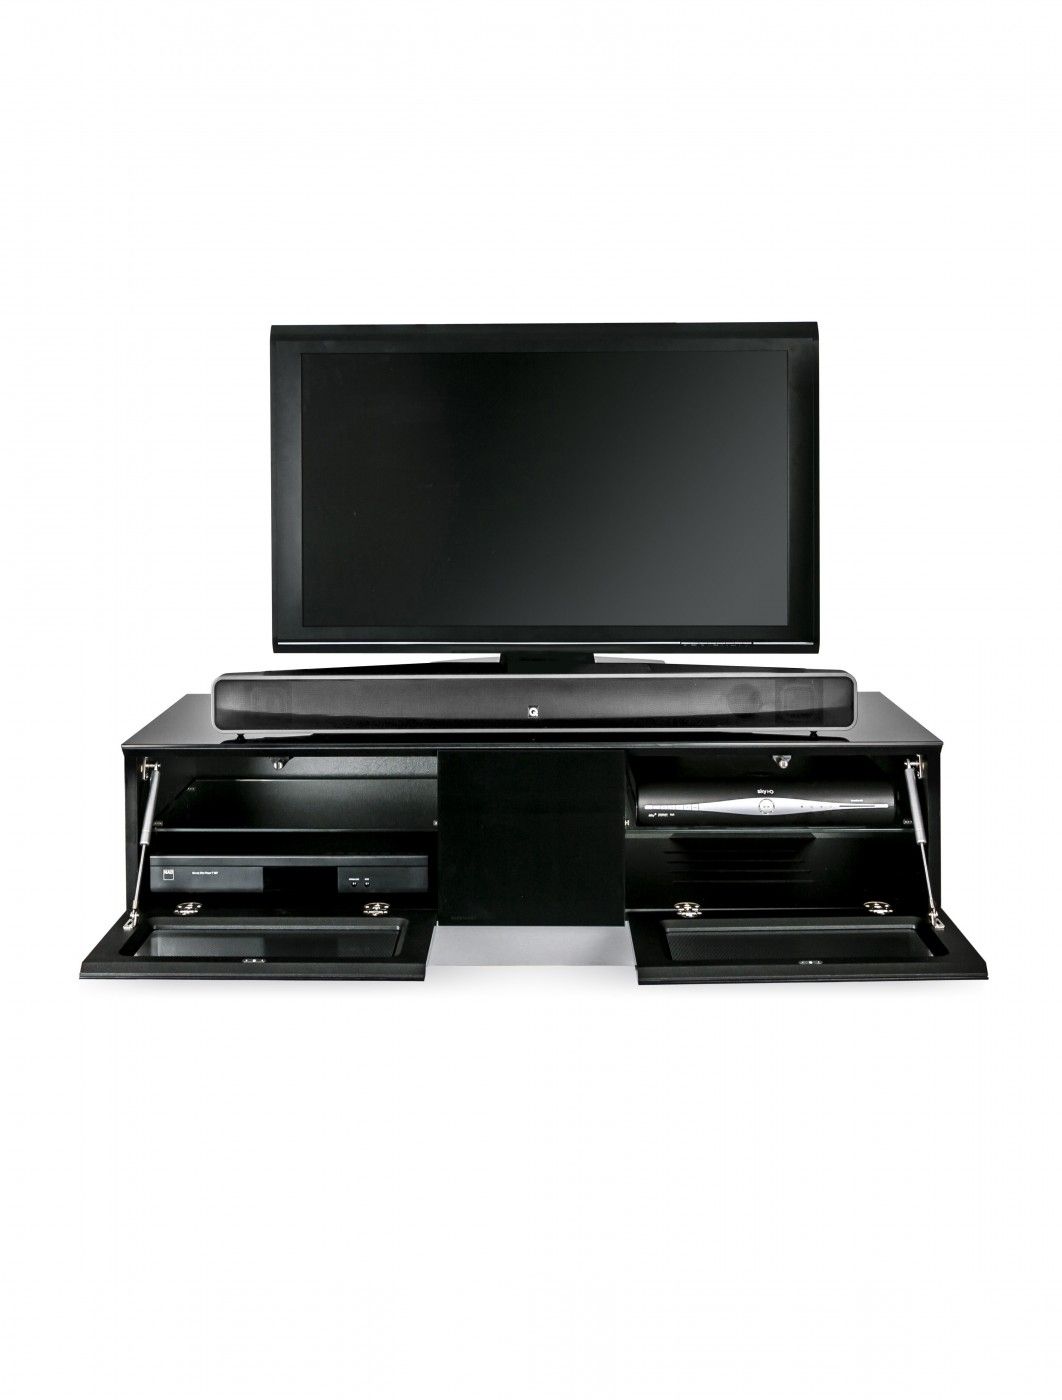 Tv Stand Element Modular Emtmod1250 Blk Tv Cabinet With Regard To 57'' Tv Stands With Open Glass Shelves Gray & Black Finsh (View 6 of 15)